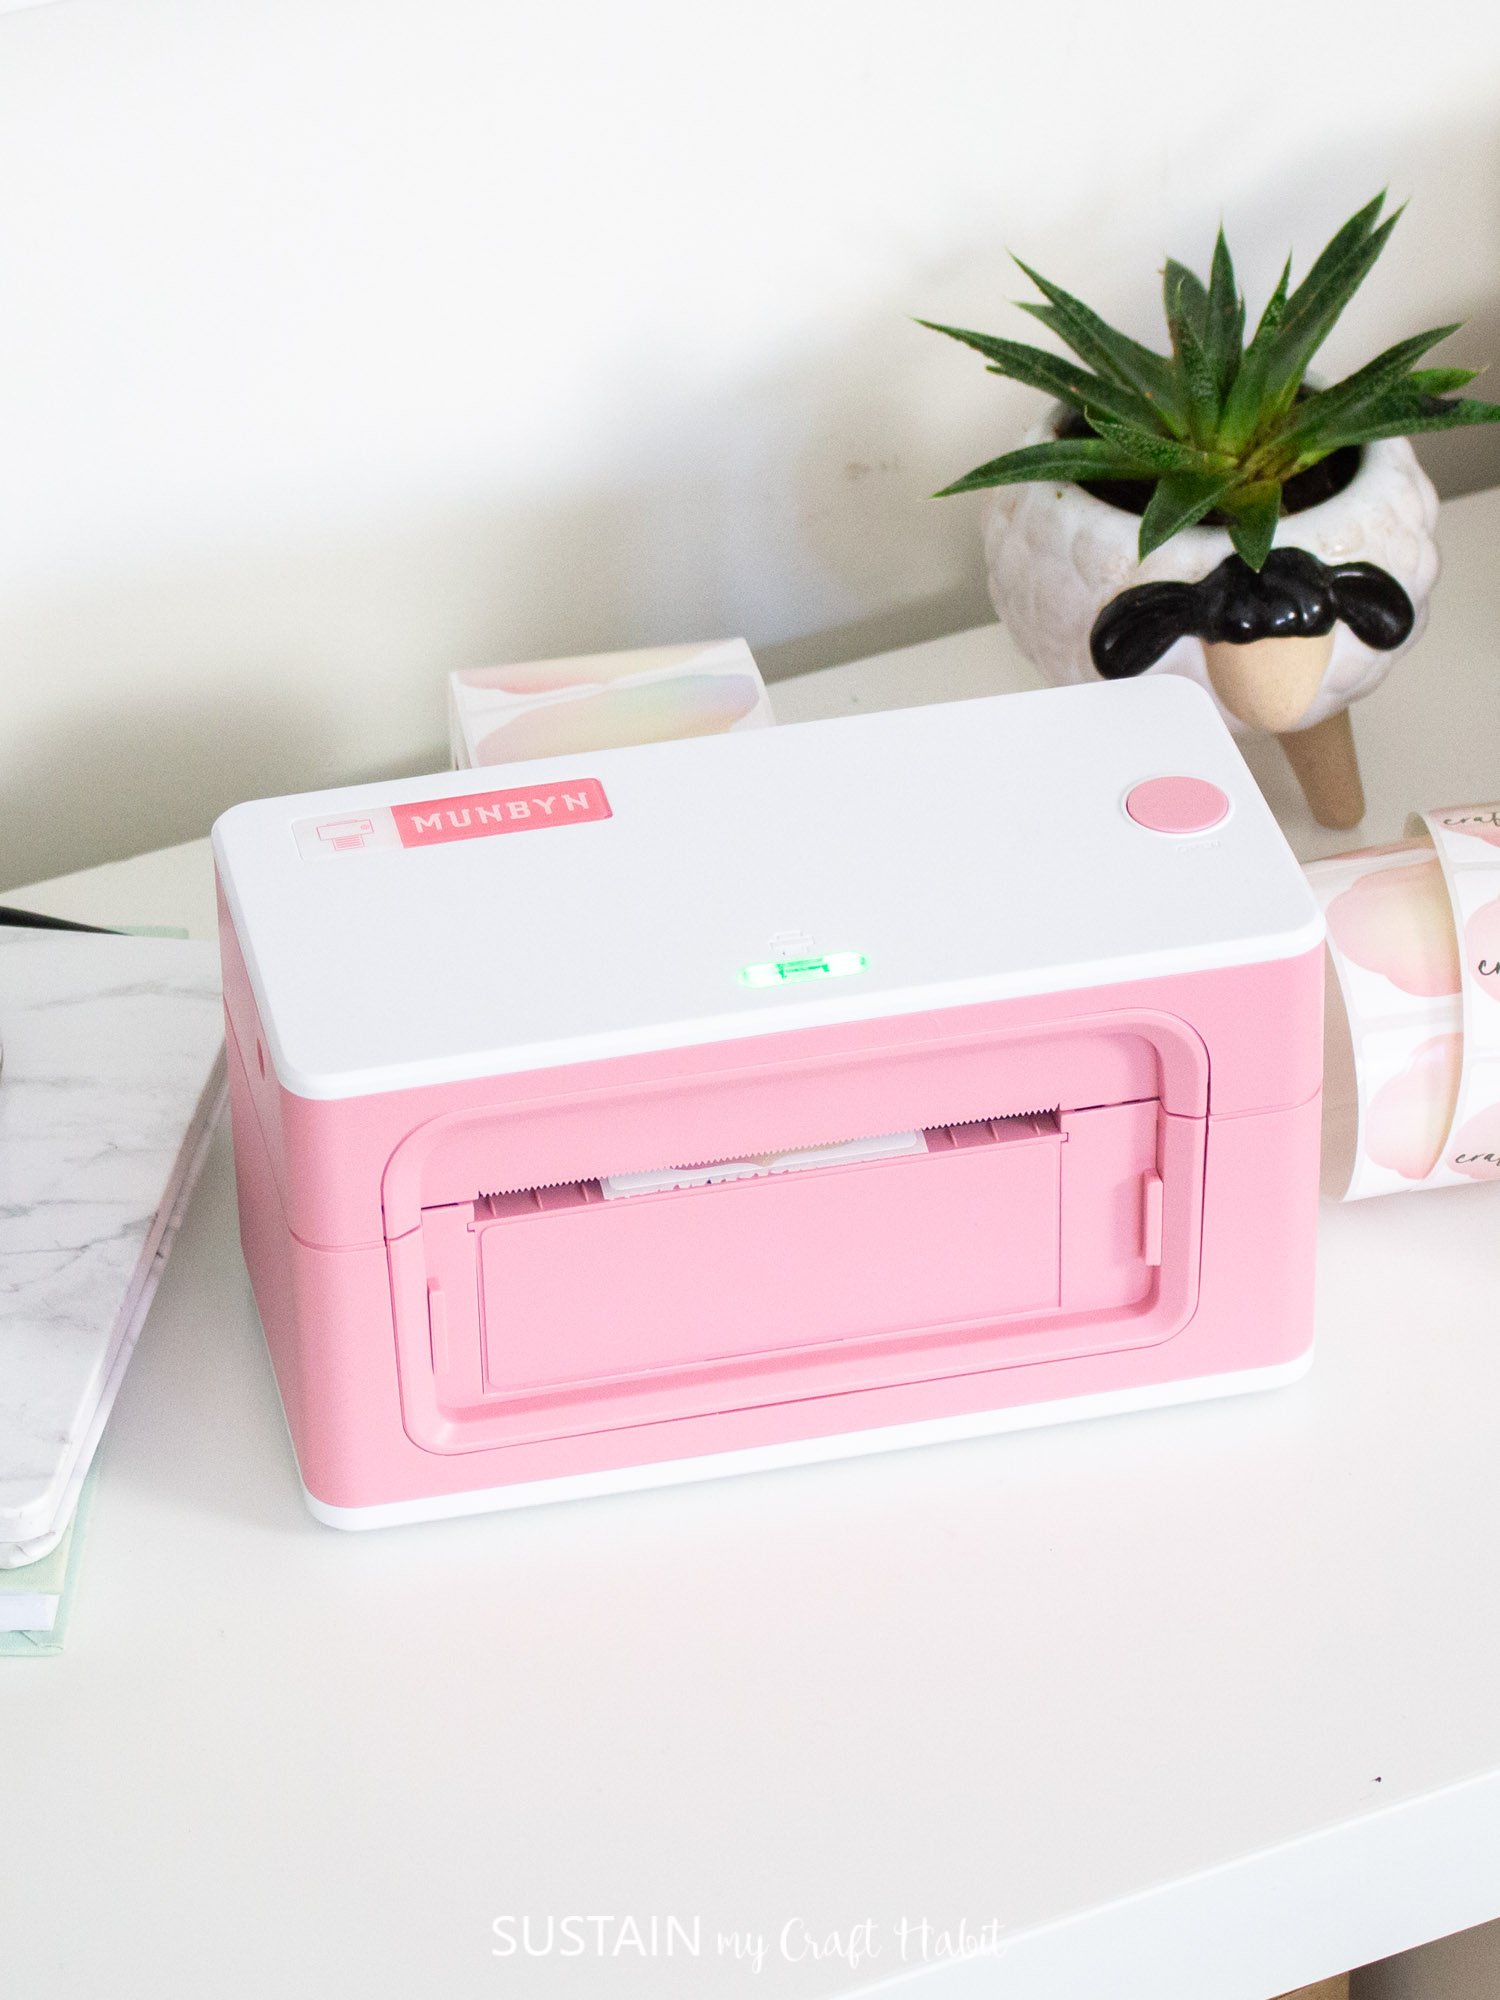 Pink Munbyn Thermal Label printer on a white surface surrounded by colorful stickers and a small plant.